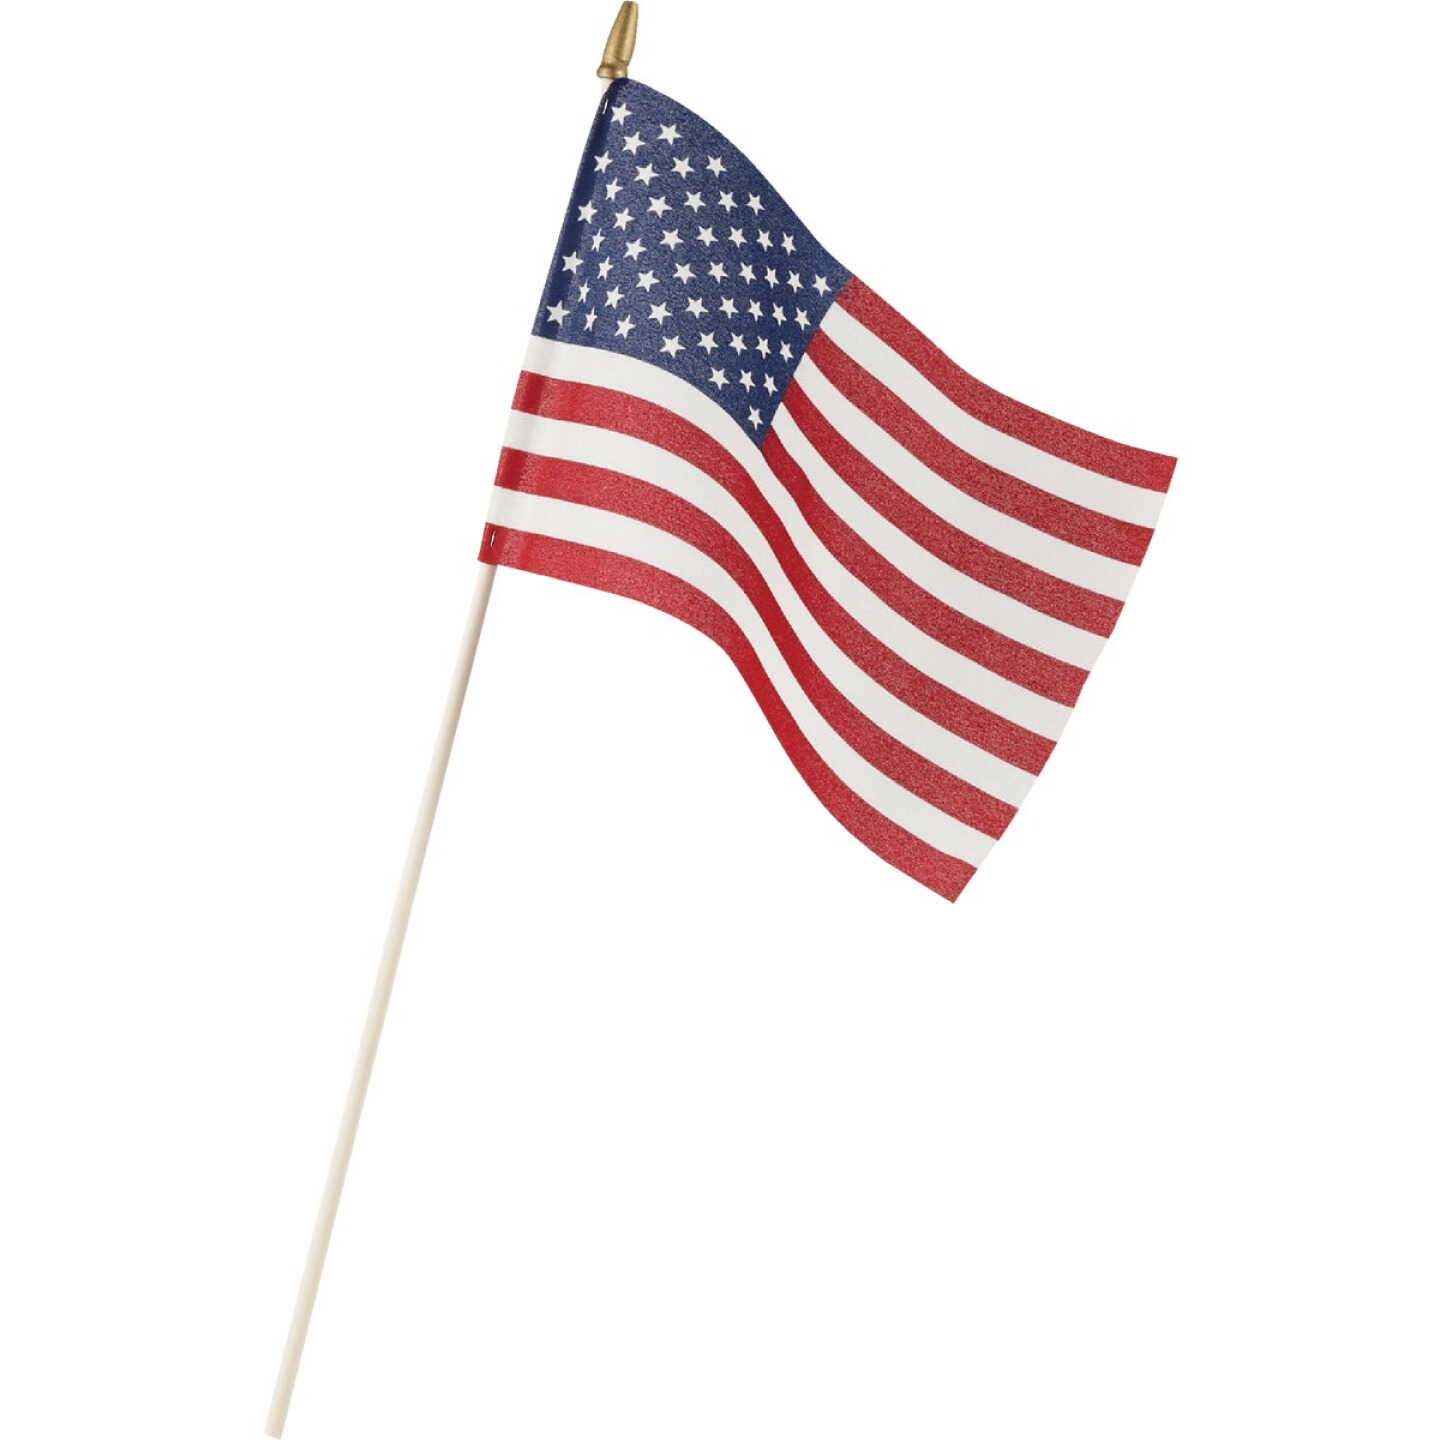 Valley Forge 8 In. x 12 In. Polycotton Stick American Flag Image 1